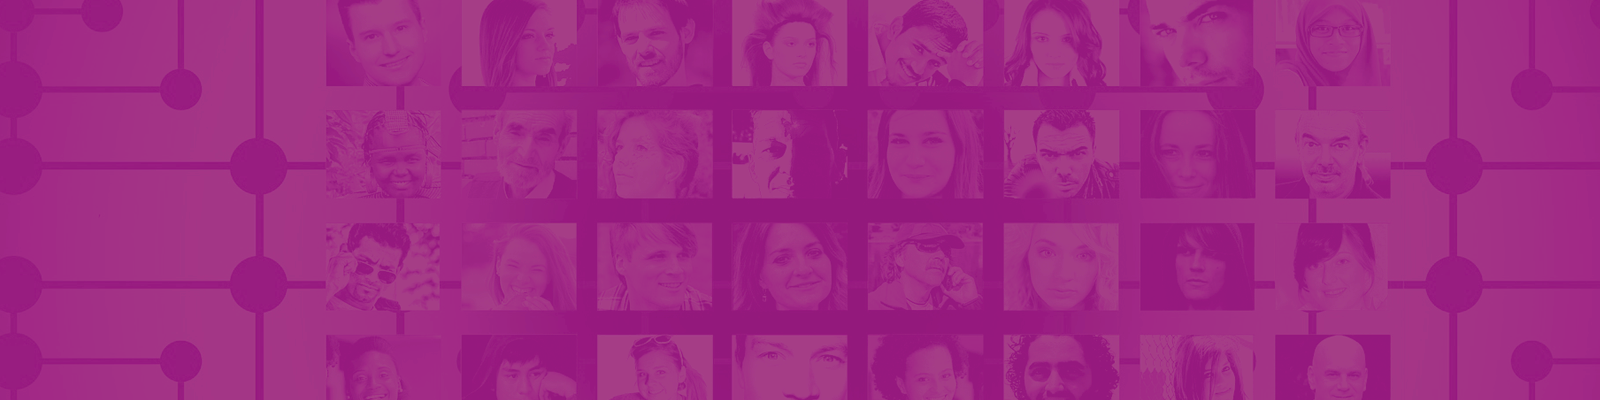 Purple image of people's faces connected via a network circuit